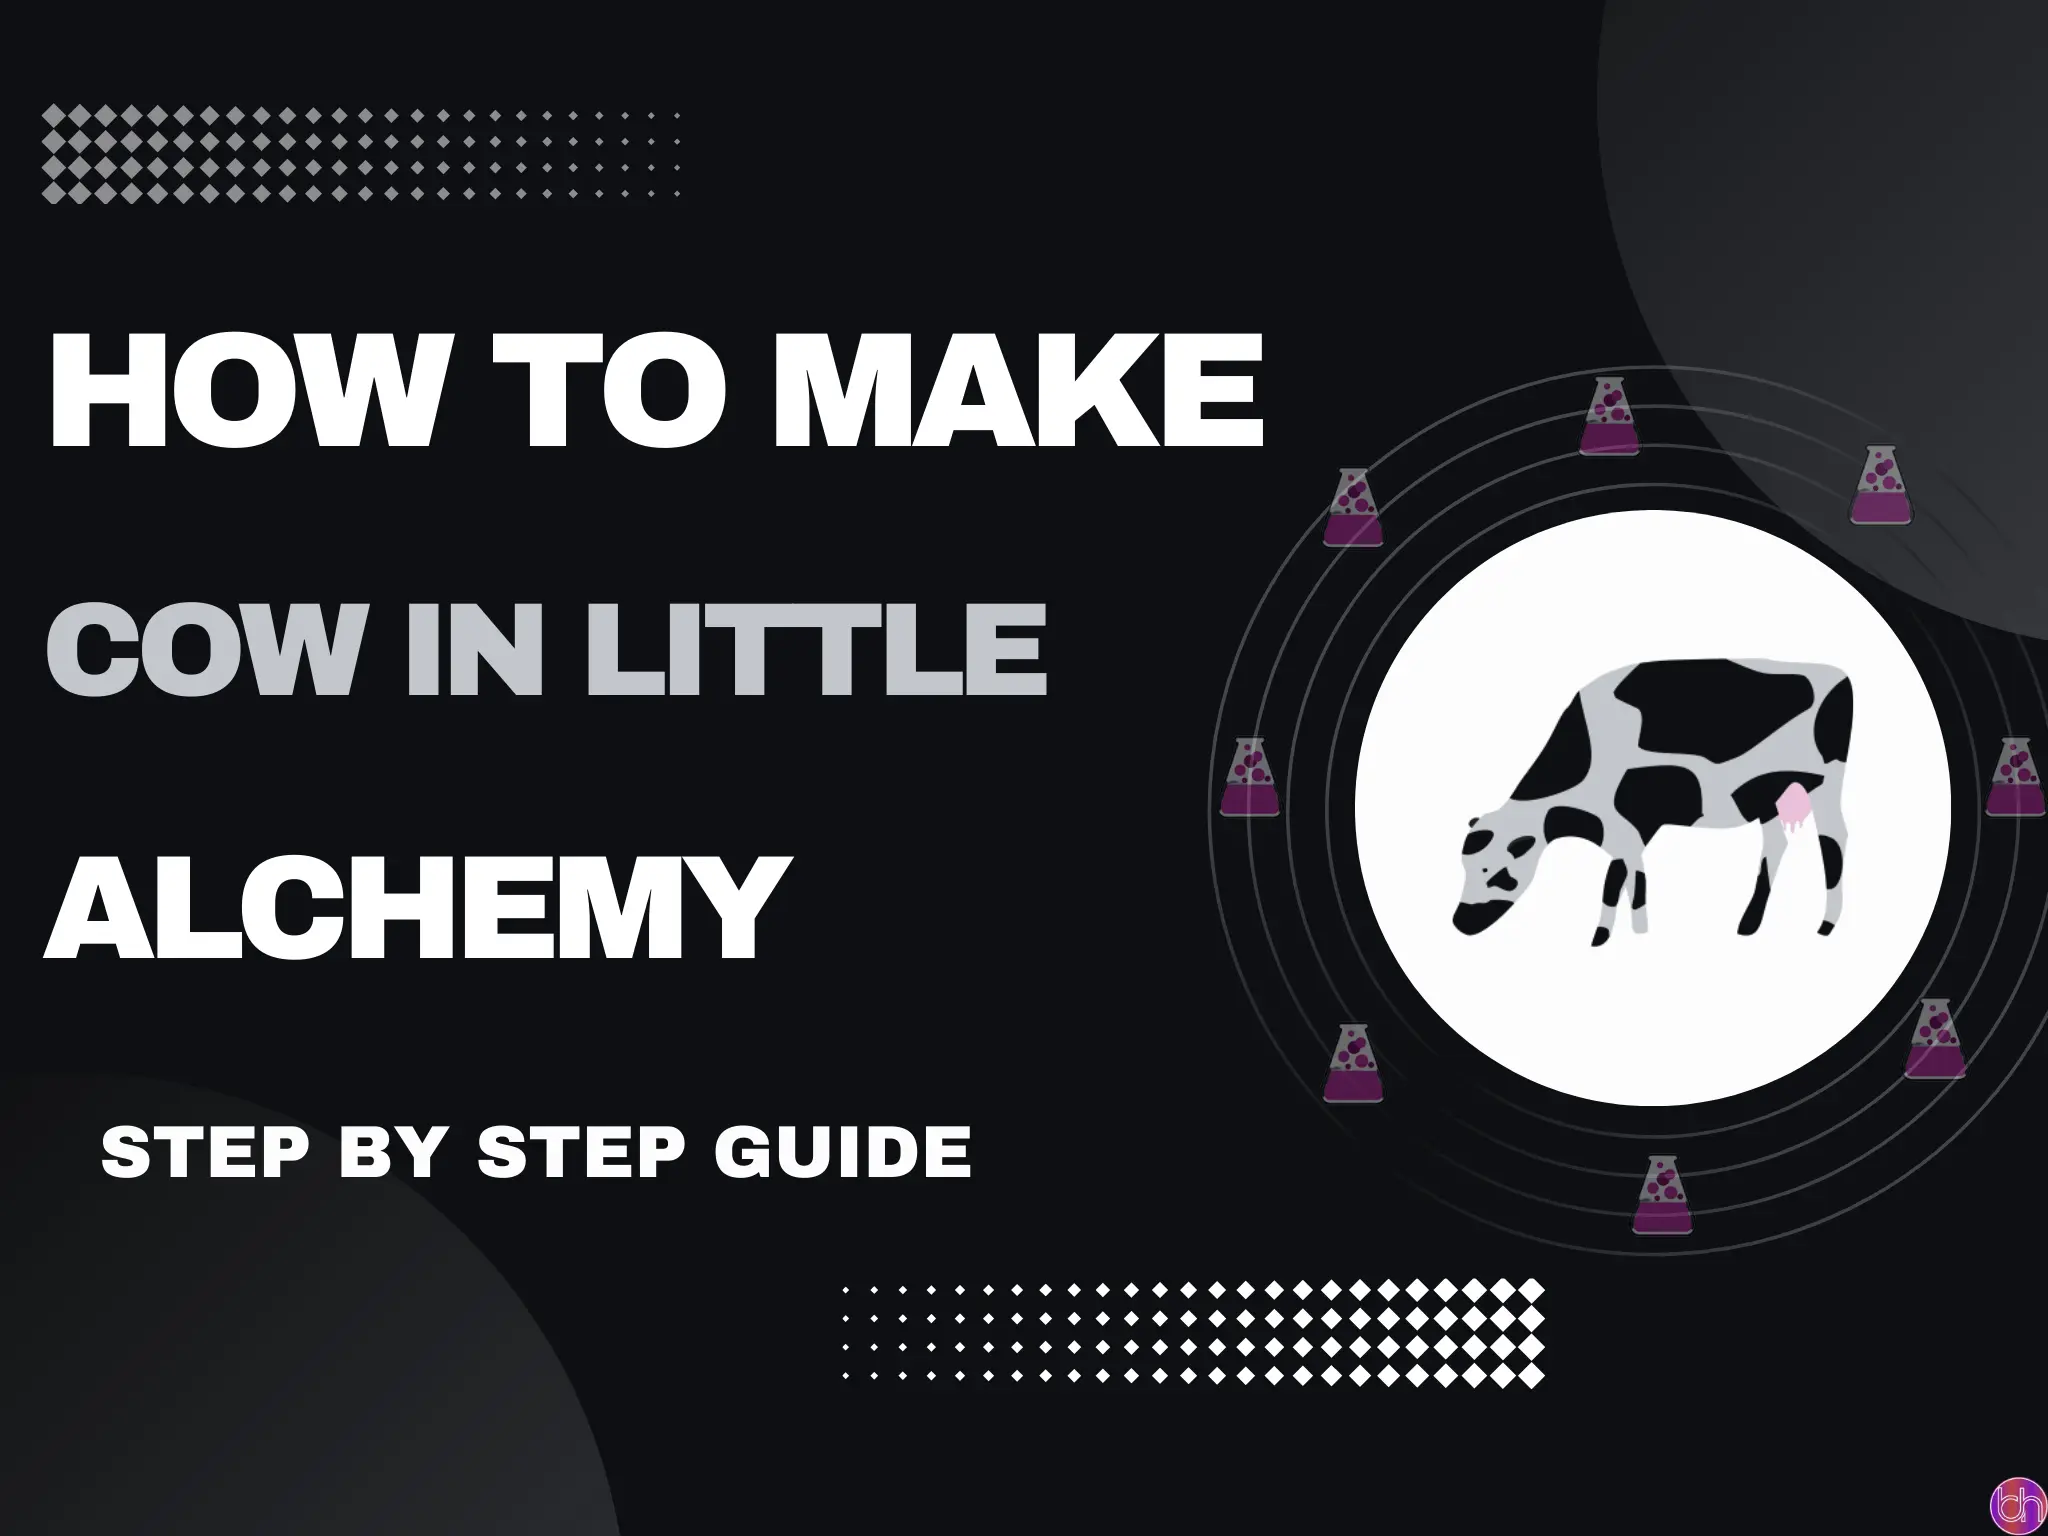 How to make Cow in little alchemy